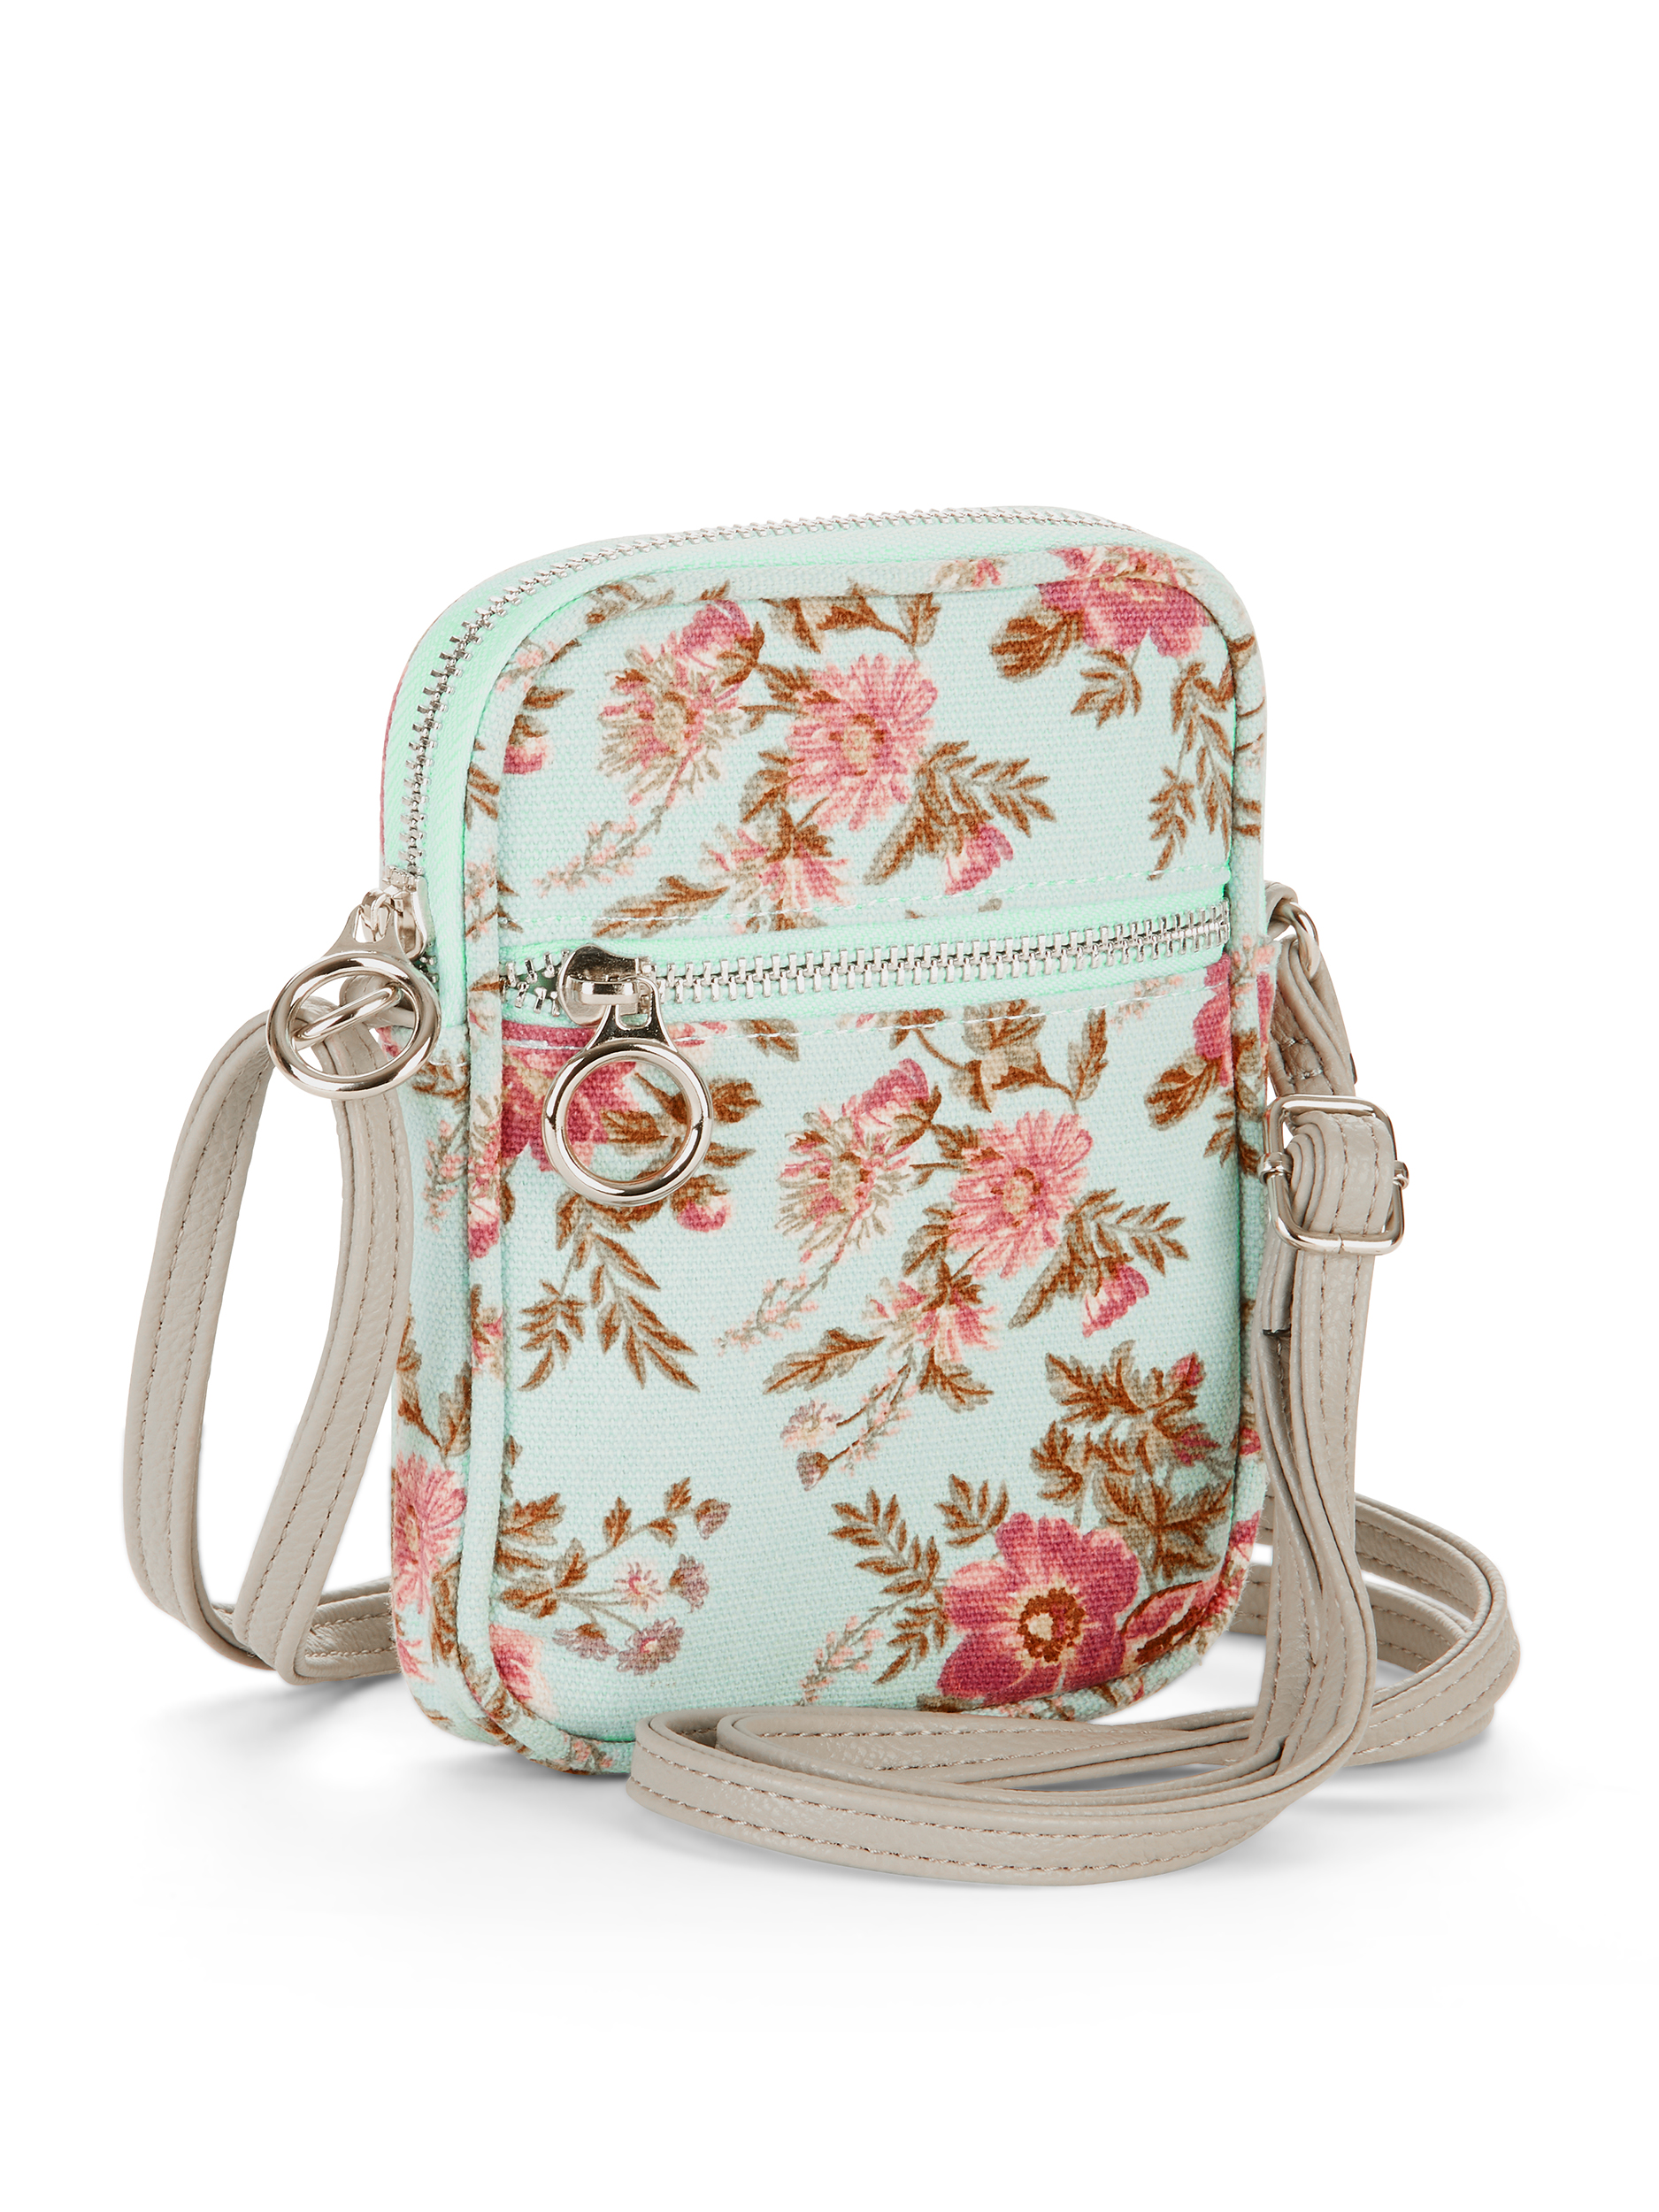 No Boundaries Mint Floral Cell Phone Crossbody - image 1 of 3